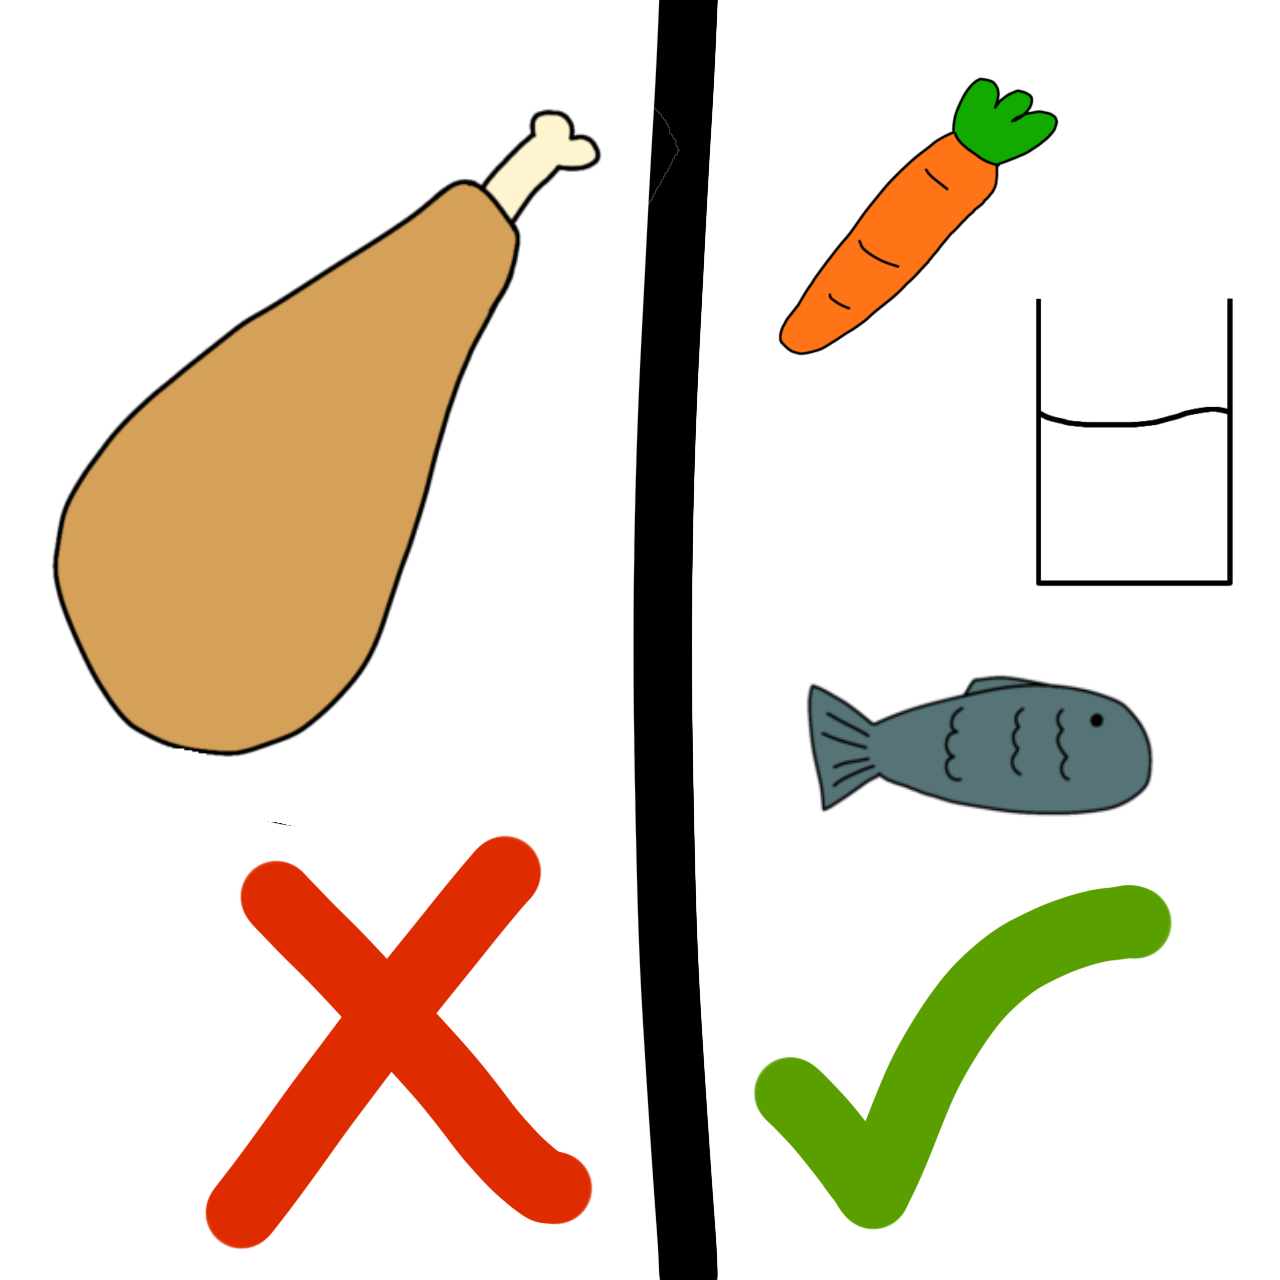  image is split in half. On one side is chicken leg, with a red X. On the other side is carrot, glass of milk, and fish, with green tick.